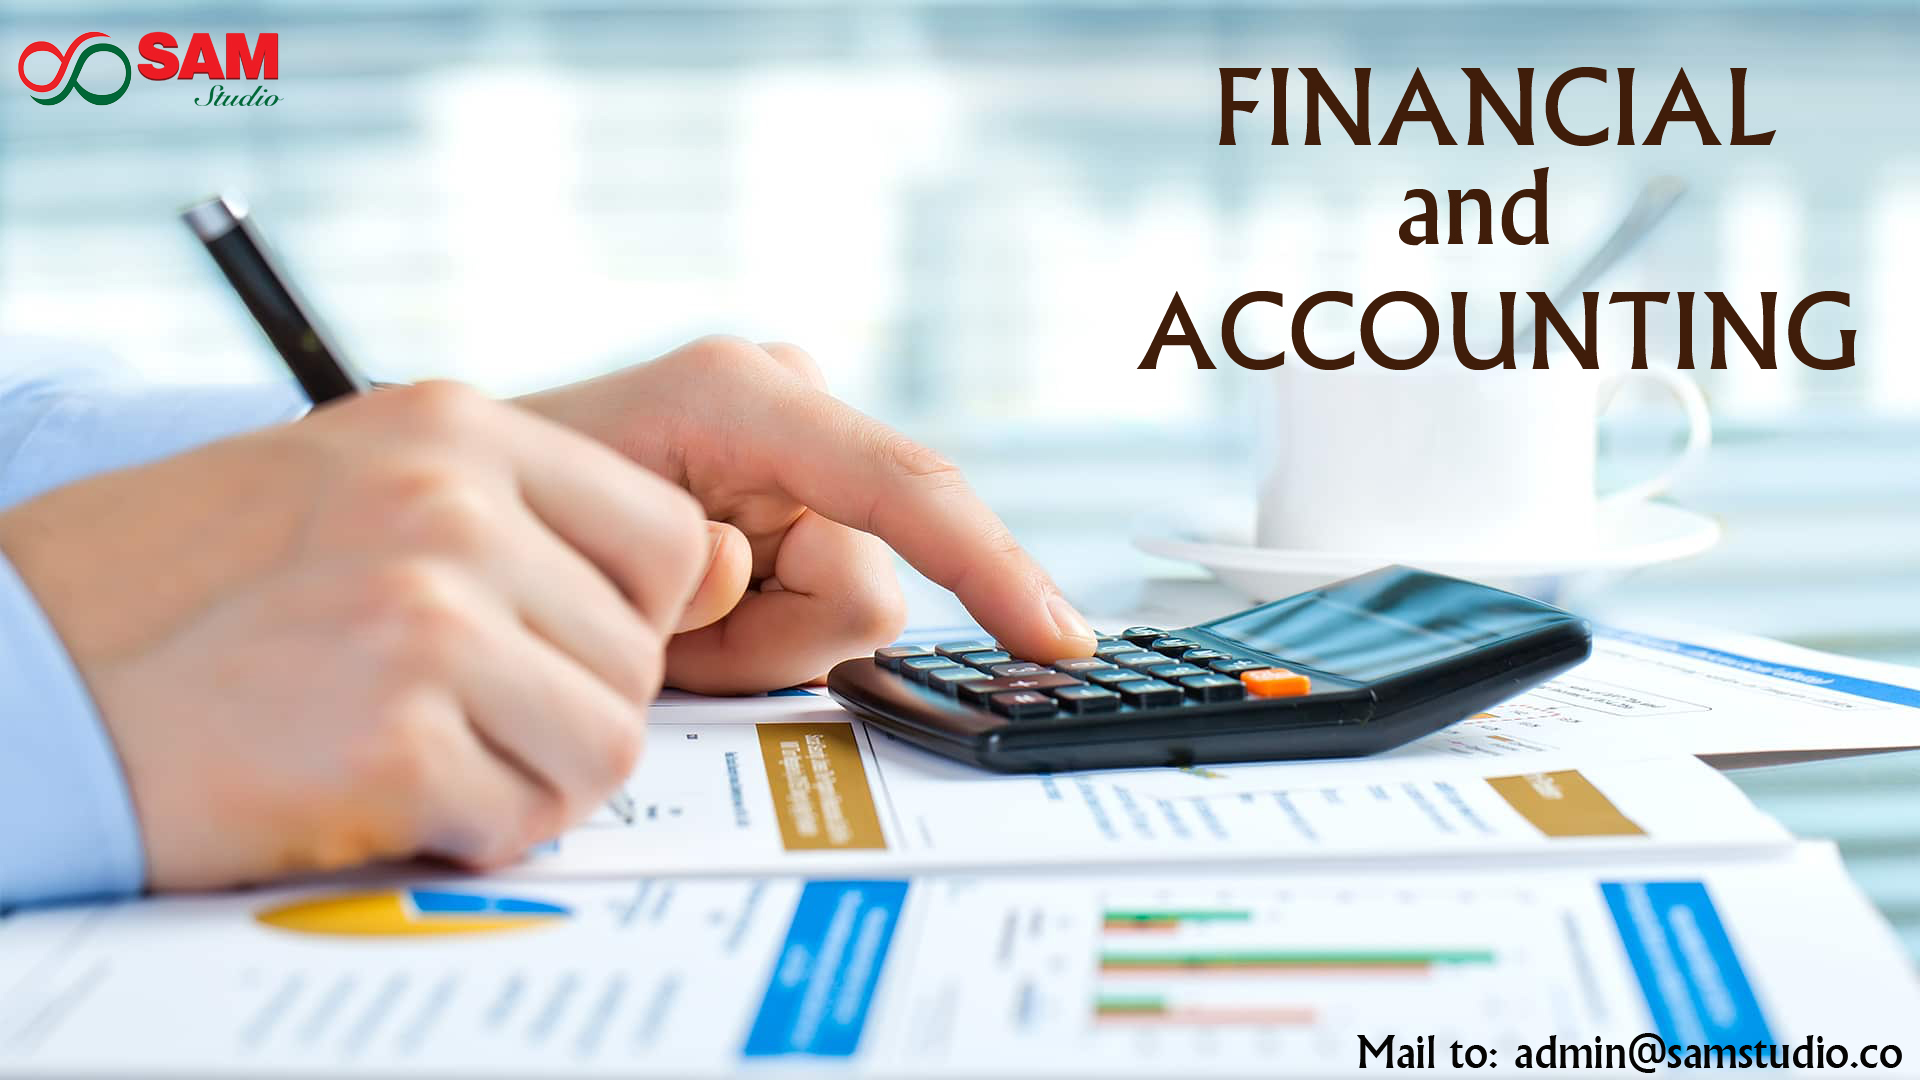 Financial and Accounting Services | Outsource Financial and Accounting Services